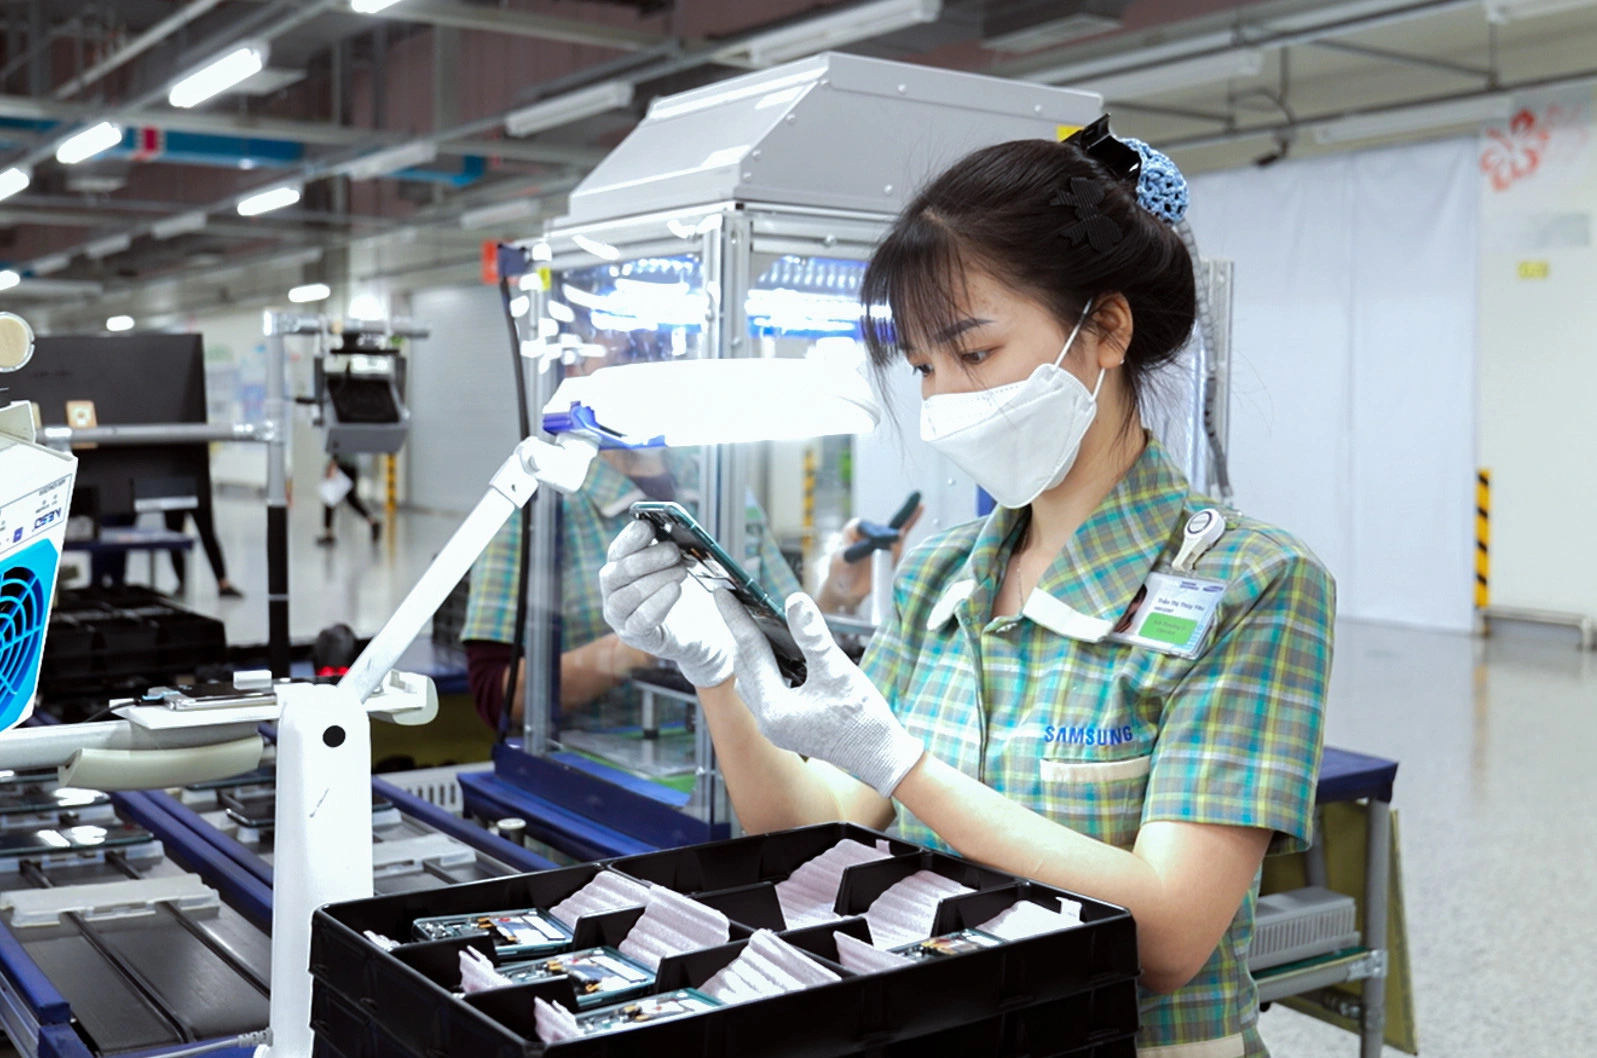 Samsung Vietnam’s export decline cited as cause of Vietnamese industrial hub’s negative growth